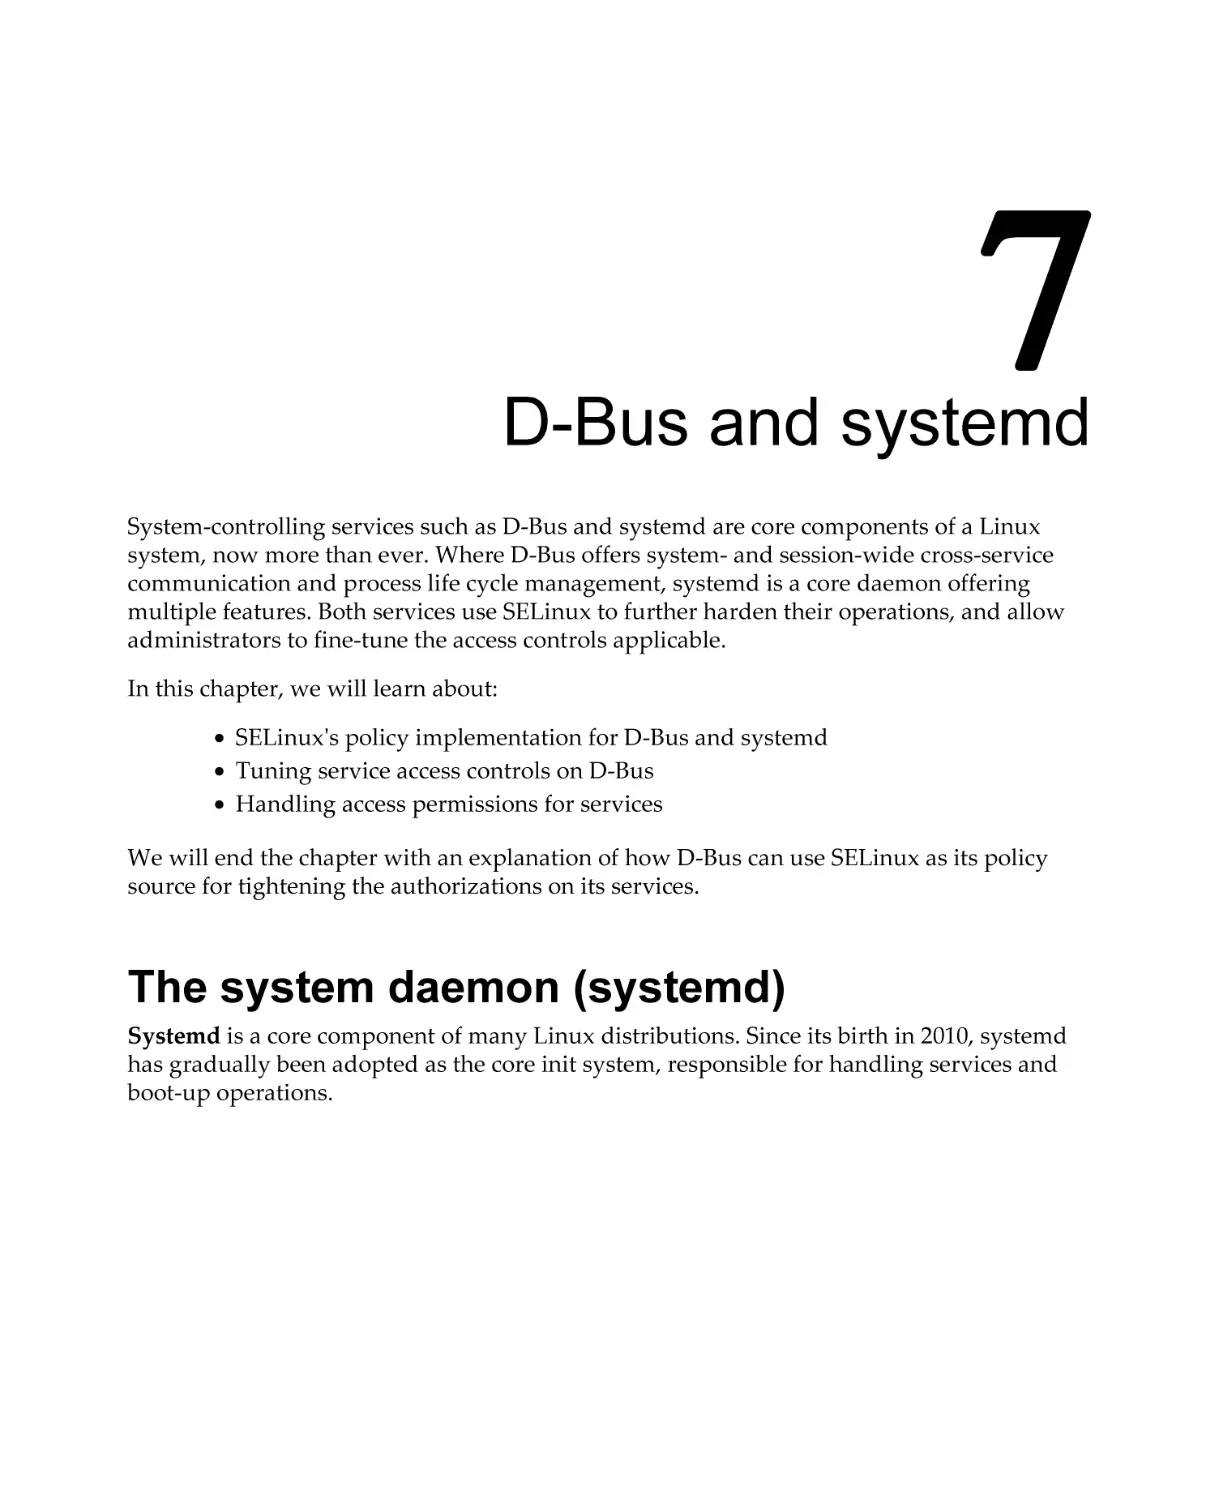 Chapter 7
The system daemon (systemd)